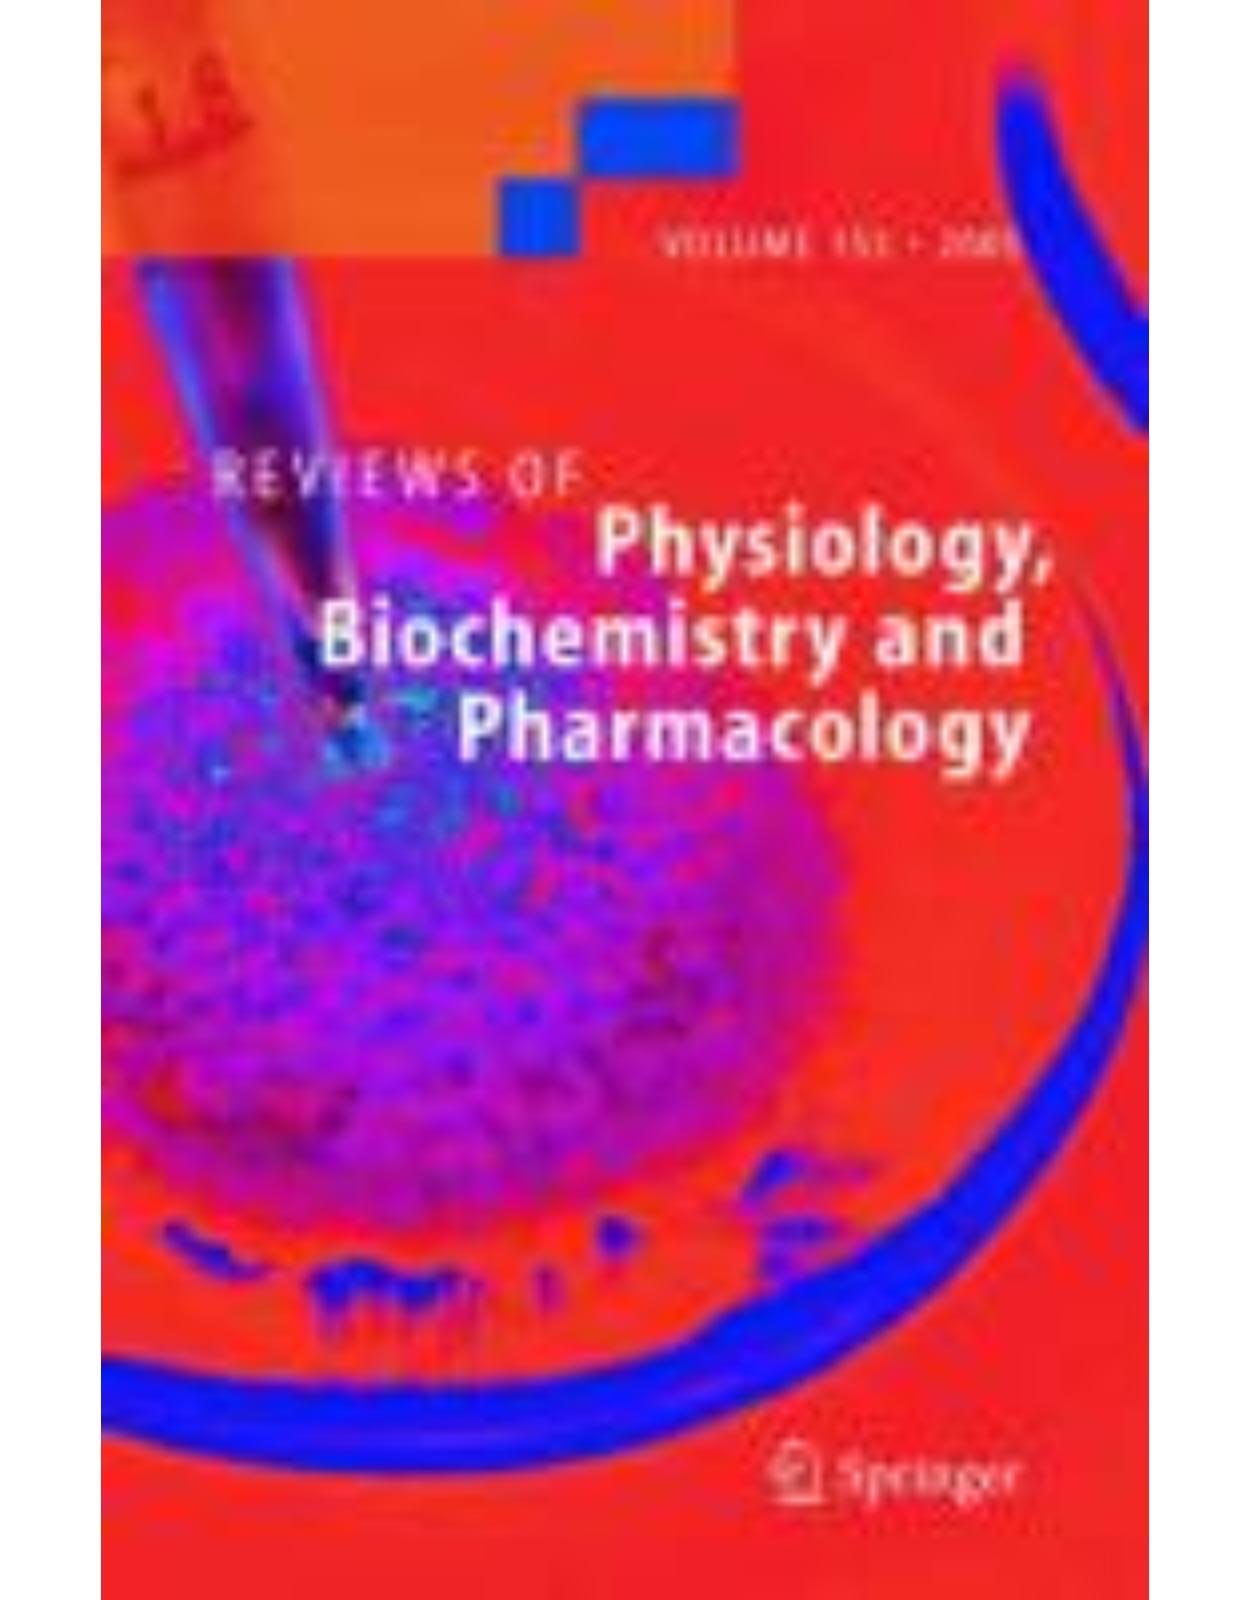 Reviews of Physiology, Biochemistry and Pharmacology, Vol 153